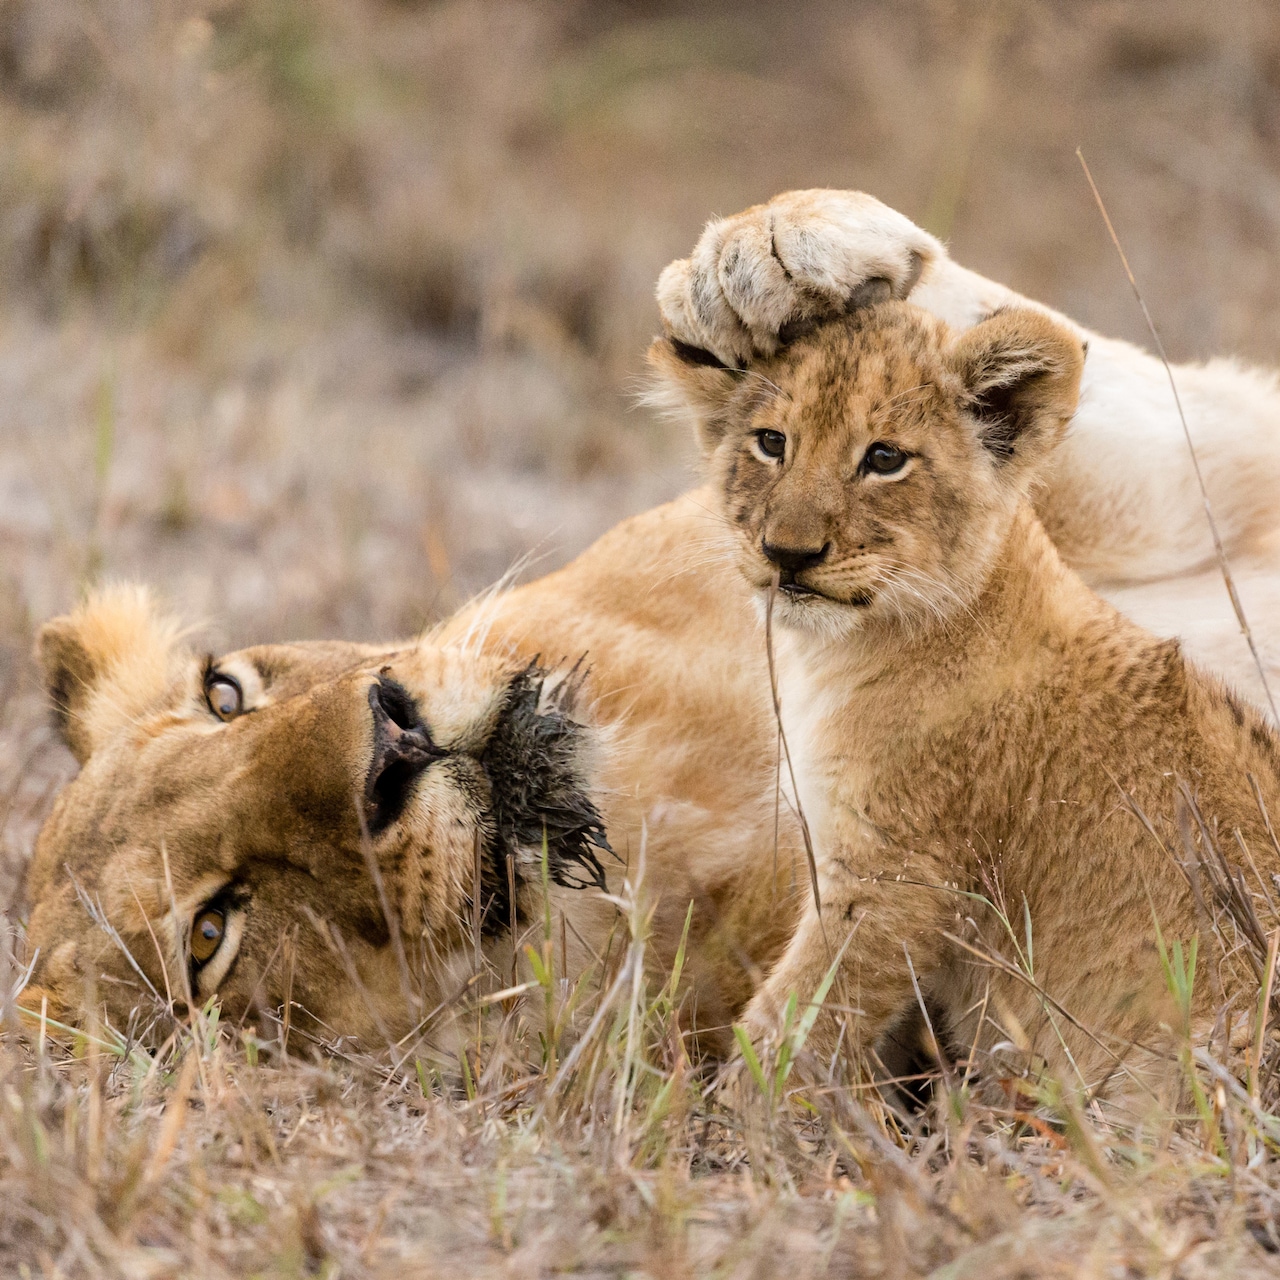 A lioness and her cub laze in the South African savanna grasslands